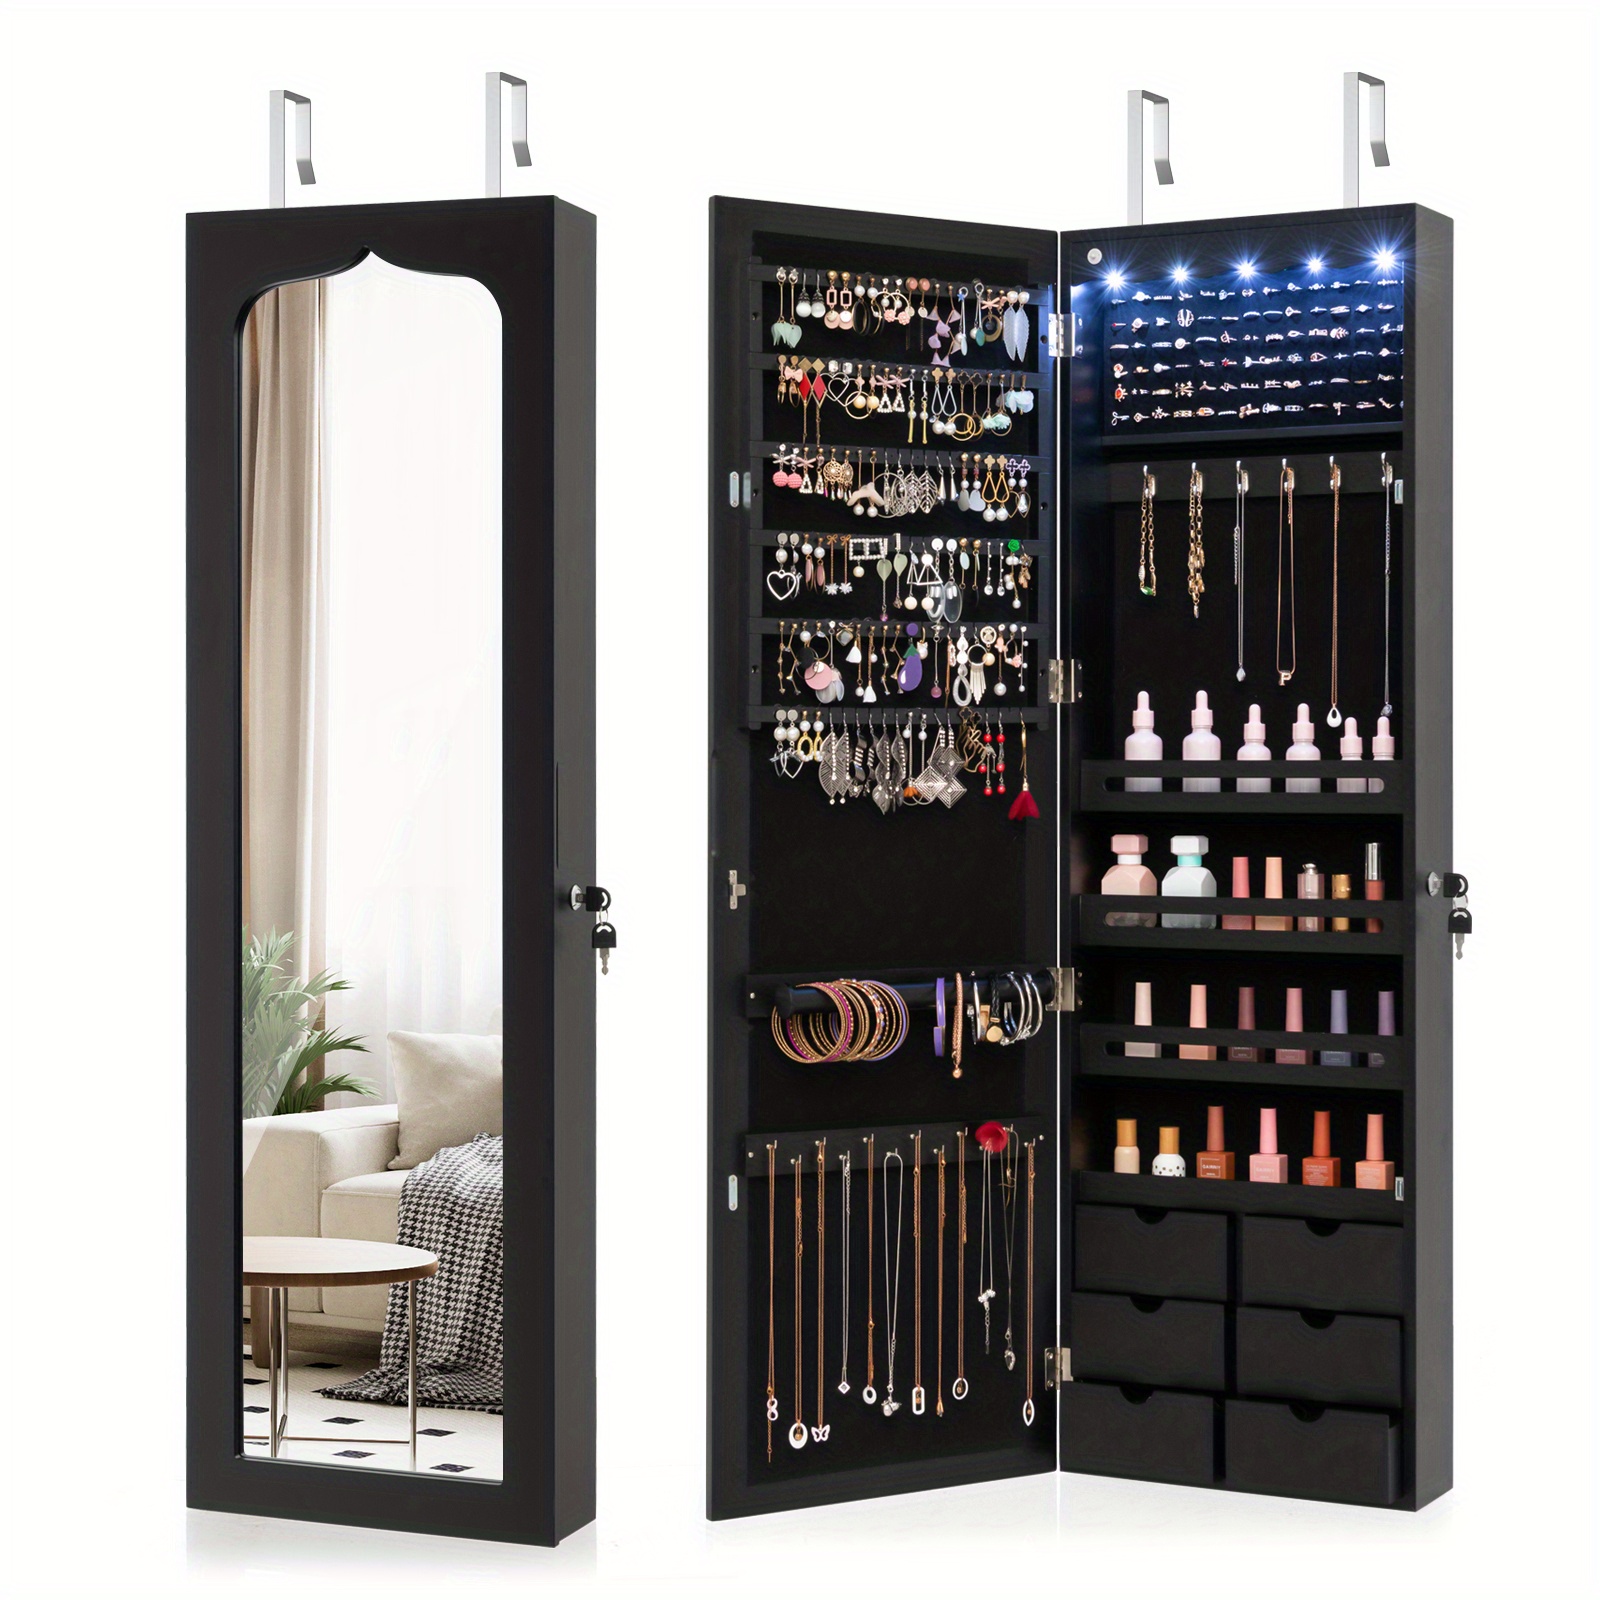 

Safstar Wall Door Mounted Led Mirror Jewelry Cabinet Lockable Armoire W/6 Drawers Black